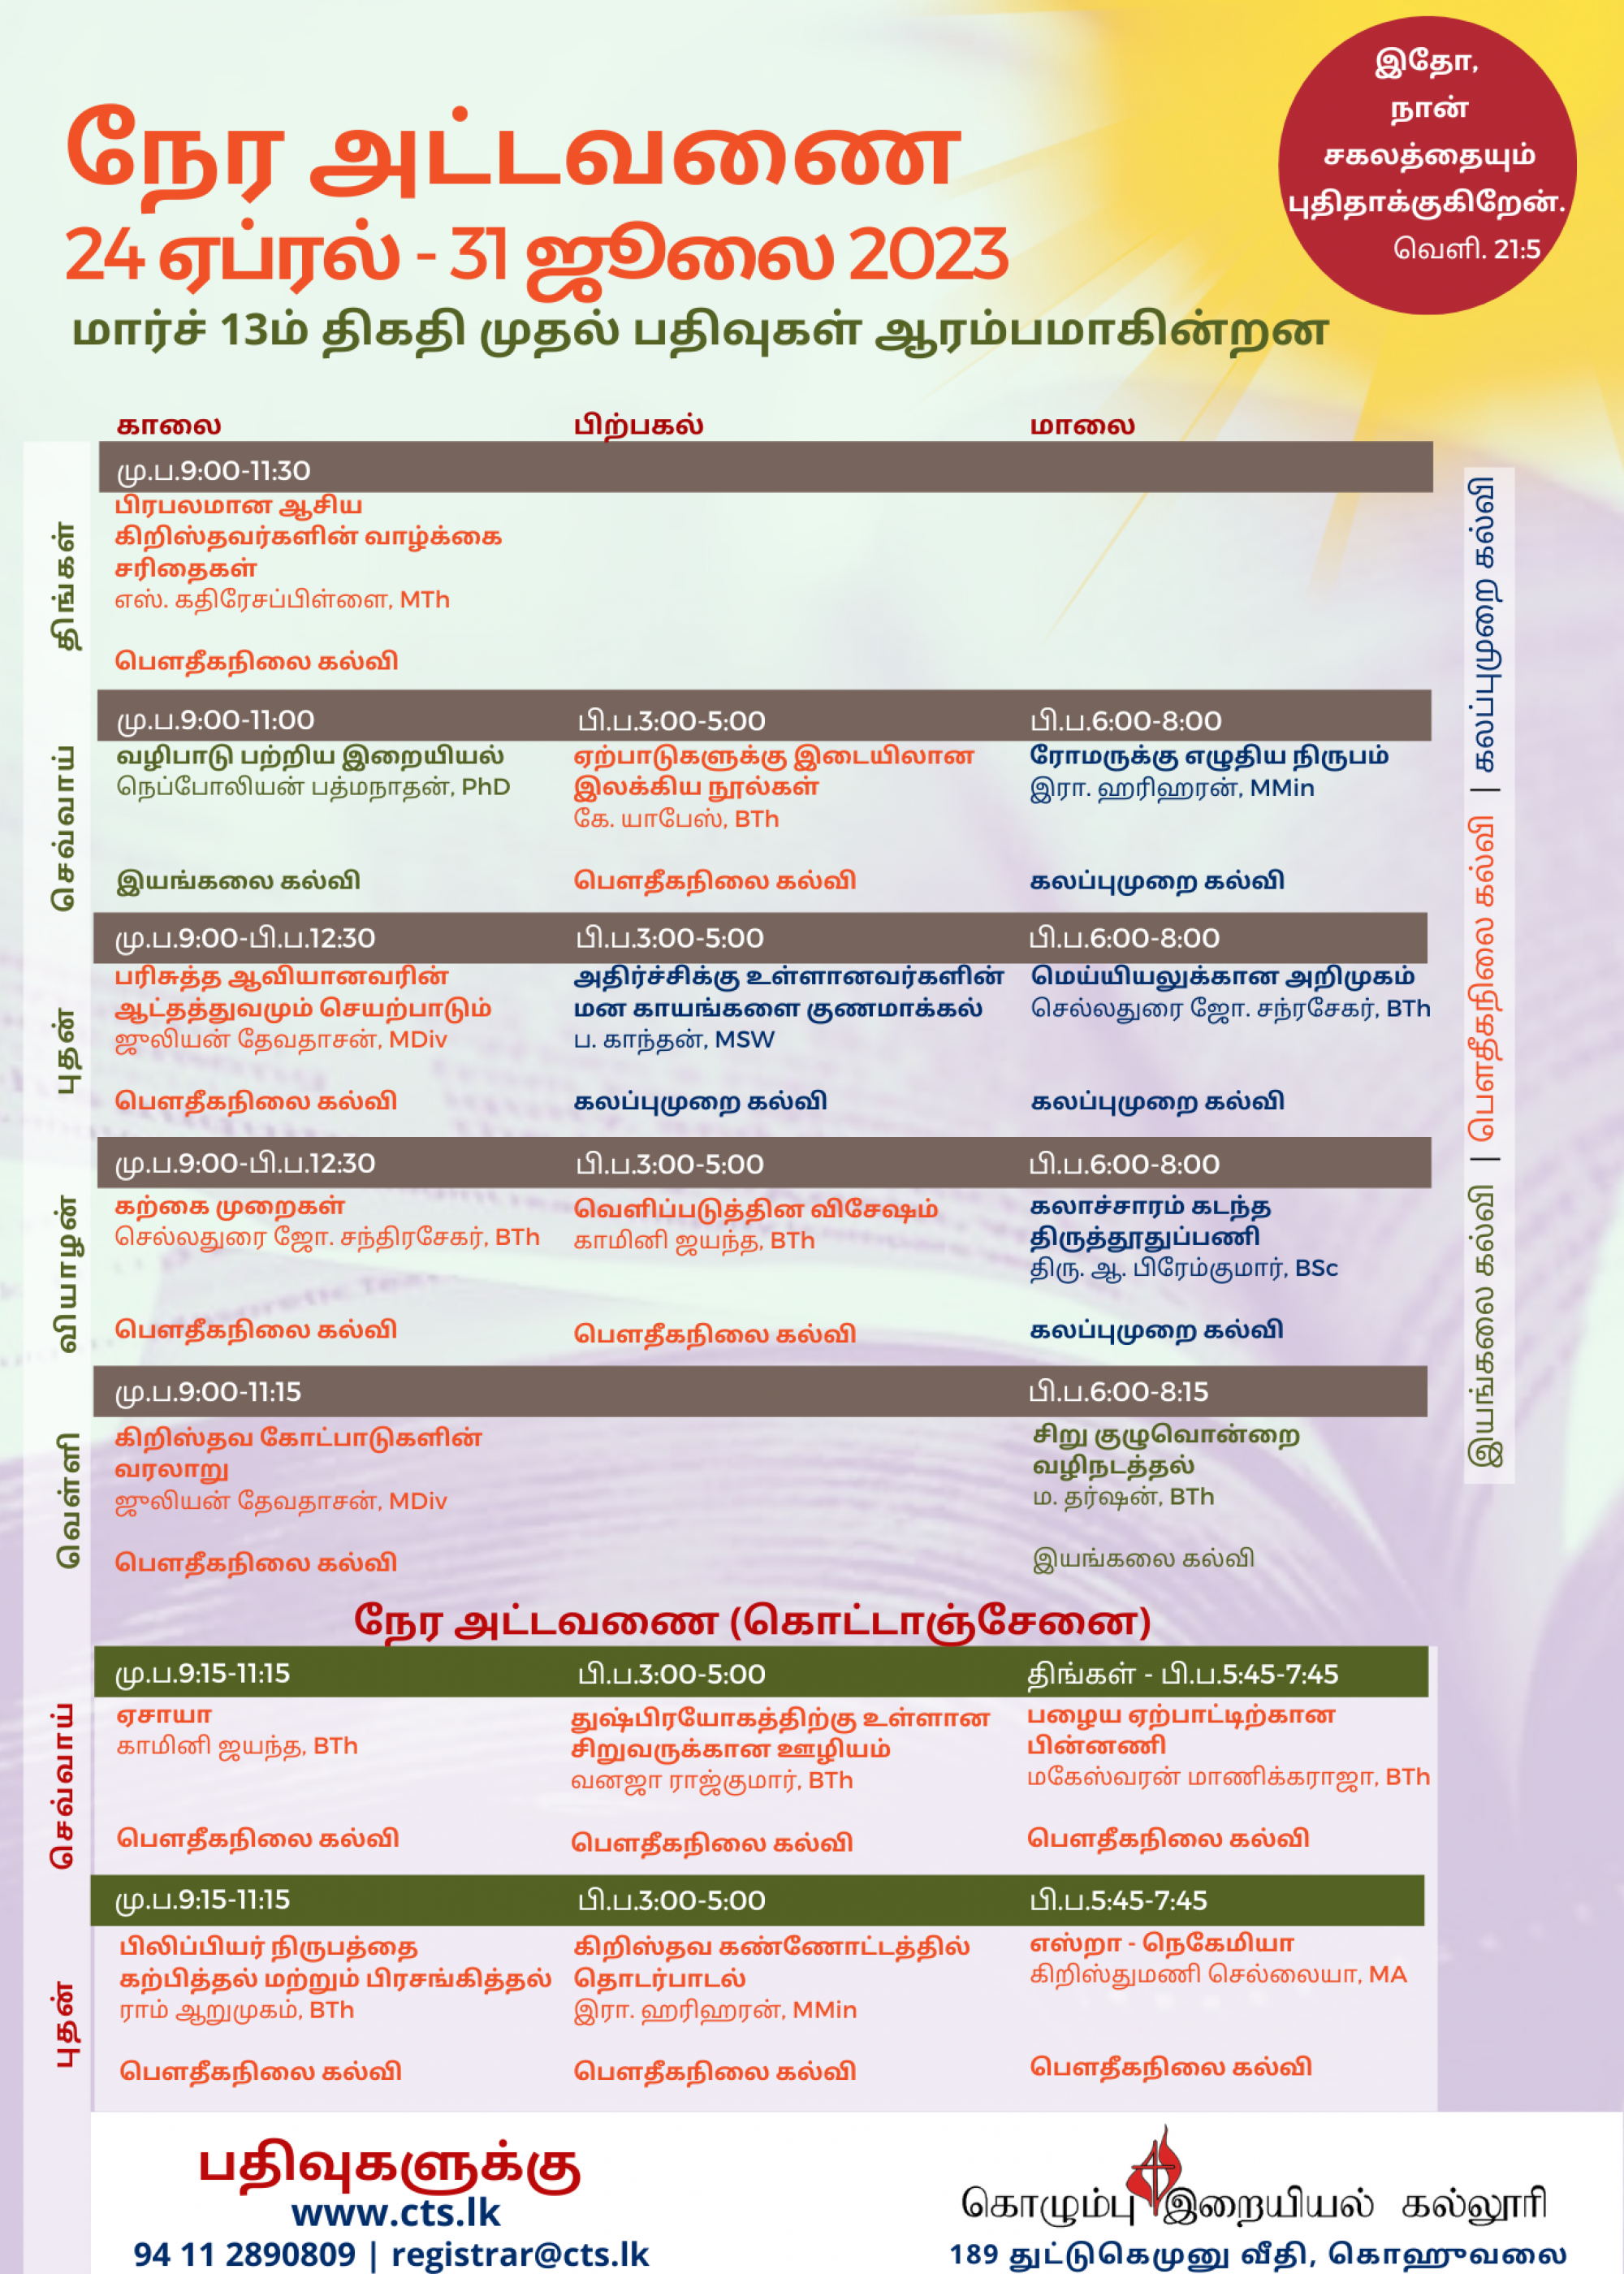 https://www.cts.lk/wp-content/uploads/2023/03/2023-Term2-Tamil-2000x2800.png